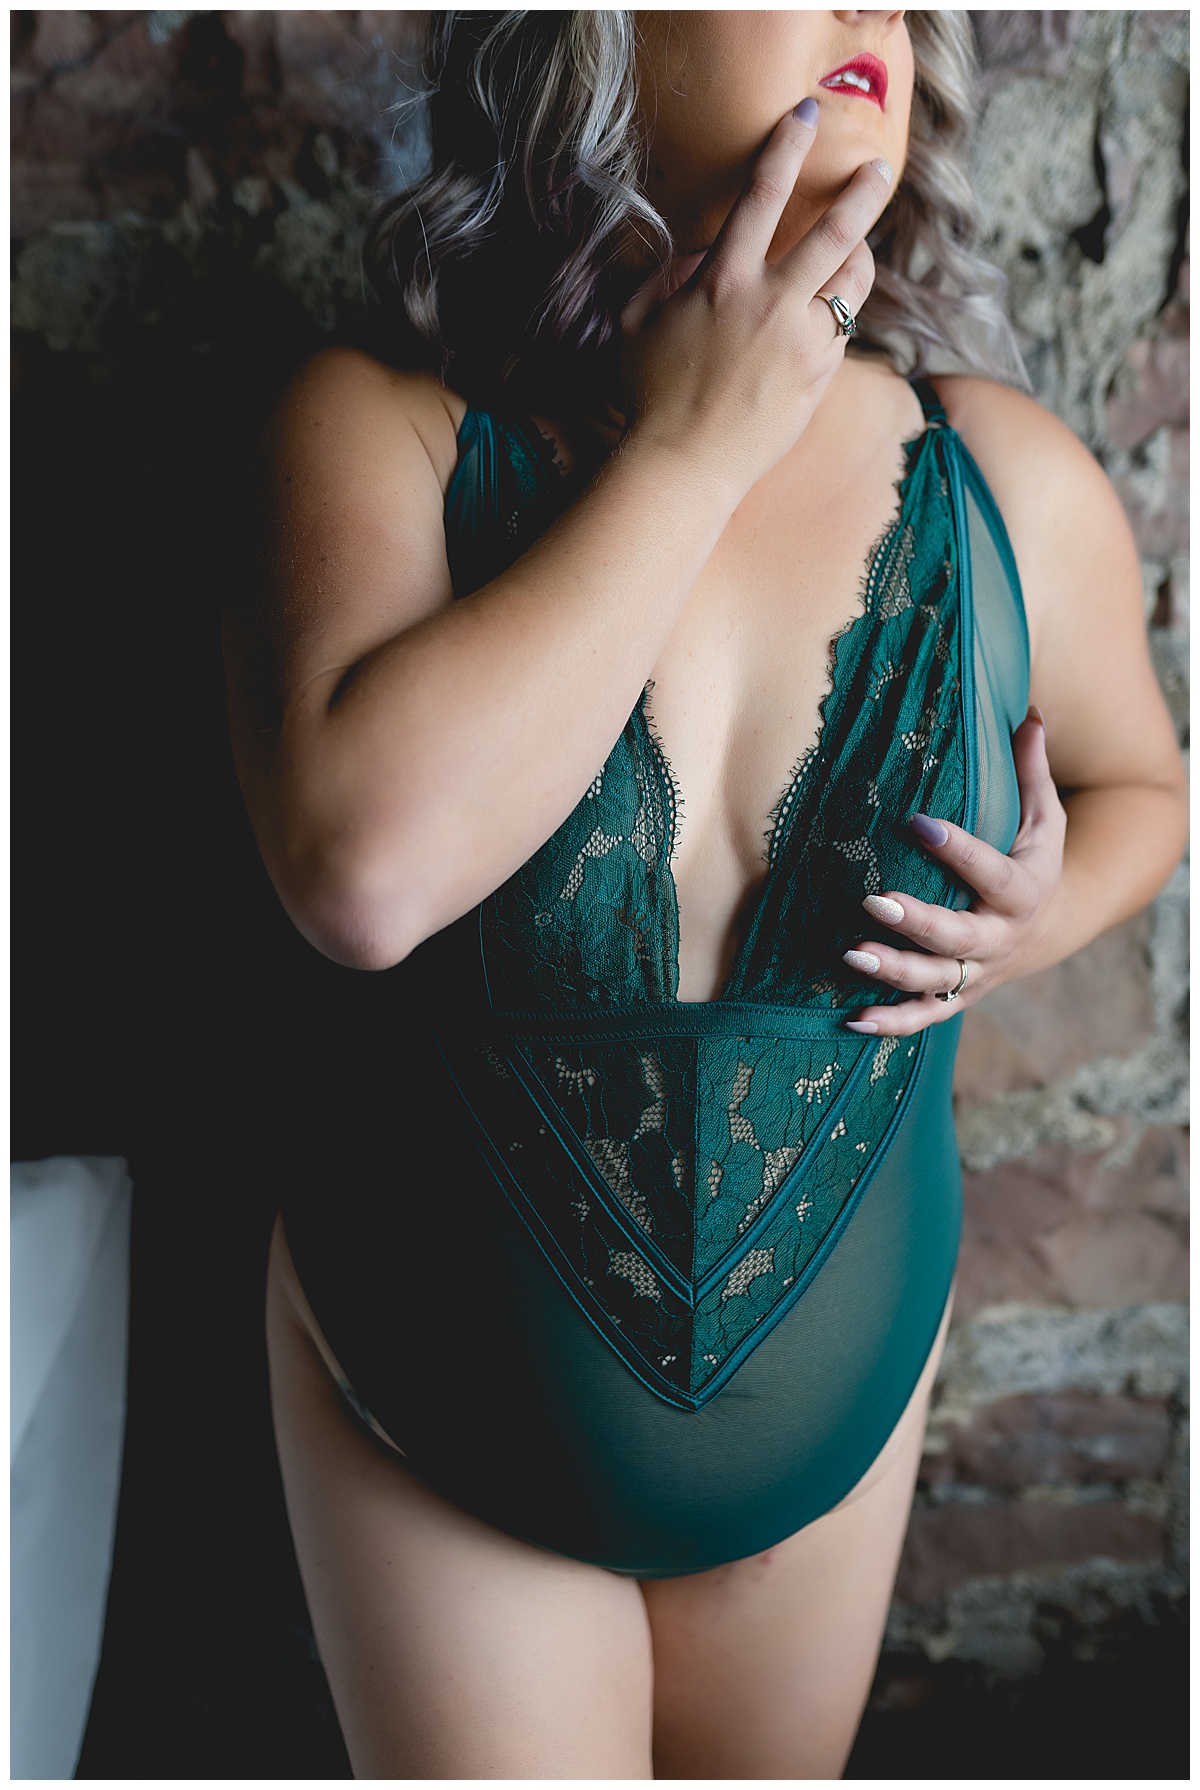 Beautiful teal lingerie by Emma Christine Photography